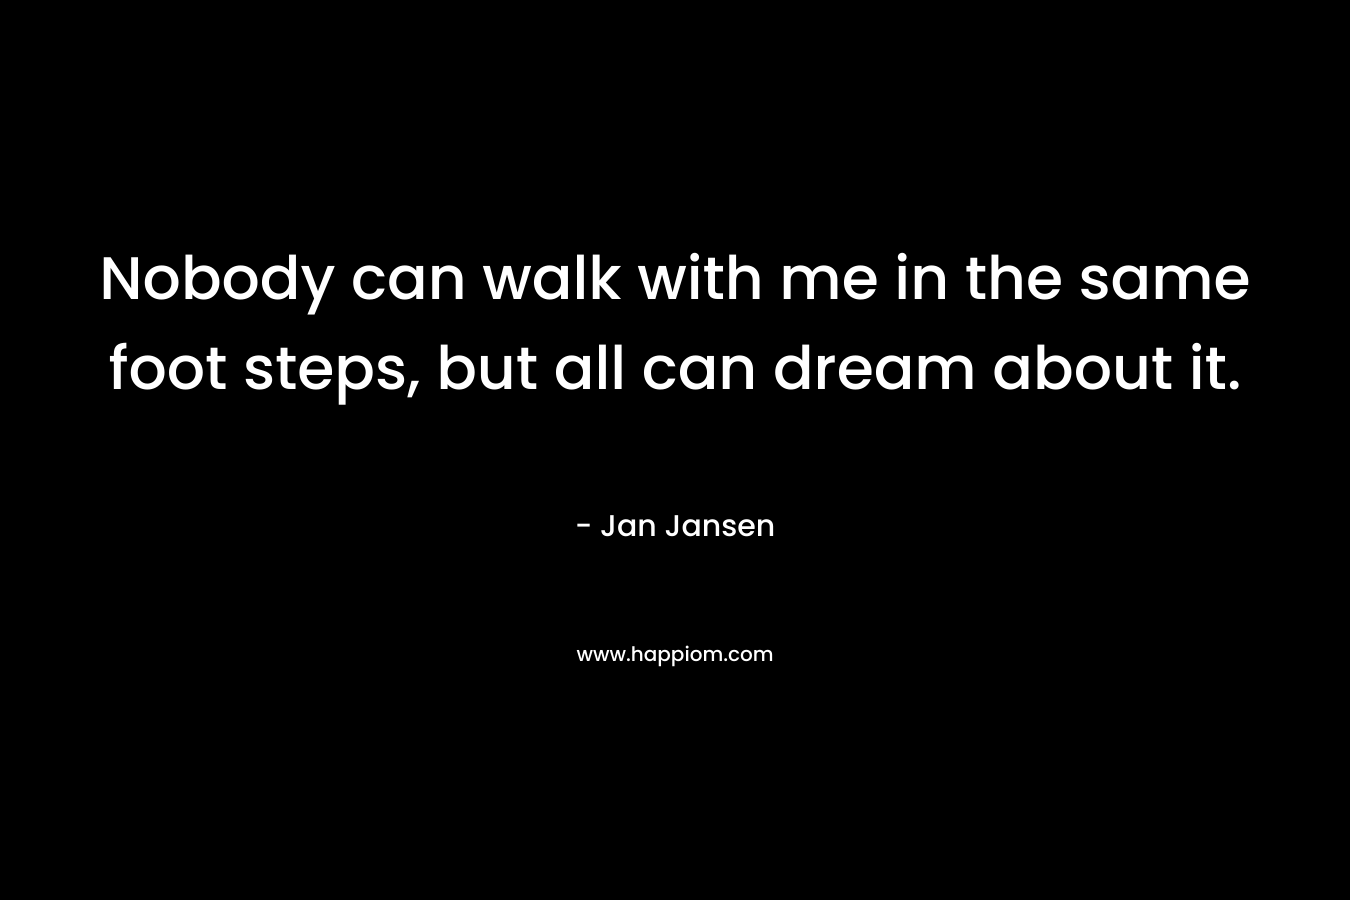 Nobody can walk with me in the same foot steps, but all can dream about it. – Jan Jansen